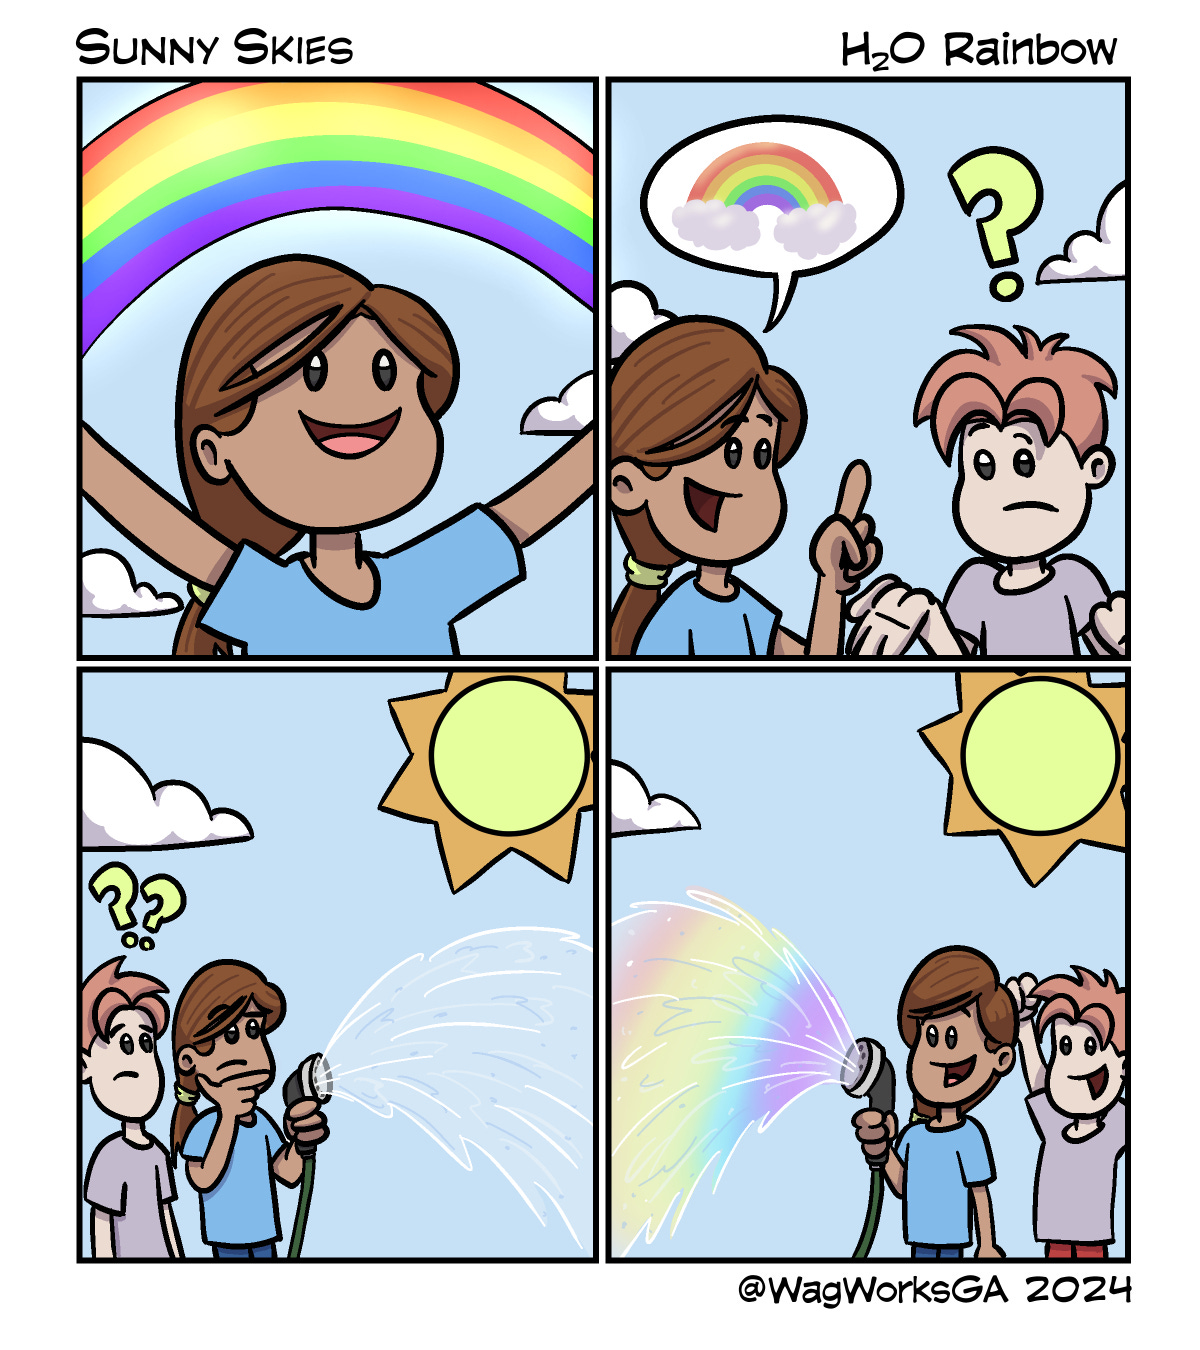 Chloe sees a magnificent rainbow overhead! In the next panel, she tells Corey to look up at the rainbow, but it's already gone. Chloe remembers she can make a rainbow with the water hose - but it's not working! Finally, she remembers that for the rainbow to appear, the sun must be behind her as she sprays the hose! Chloe and Corey enjoy their DIY H2O Rainbow!